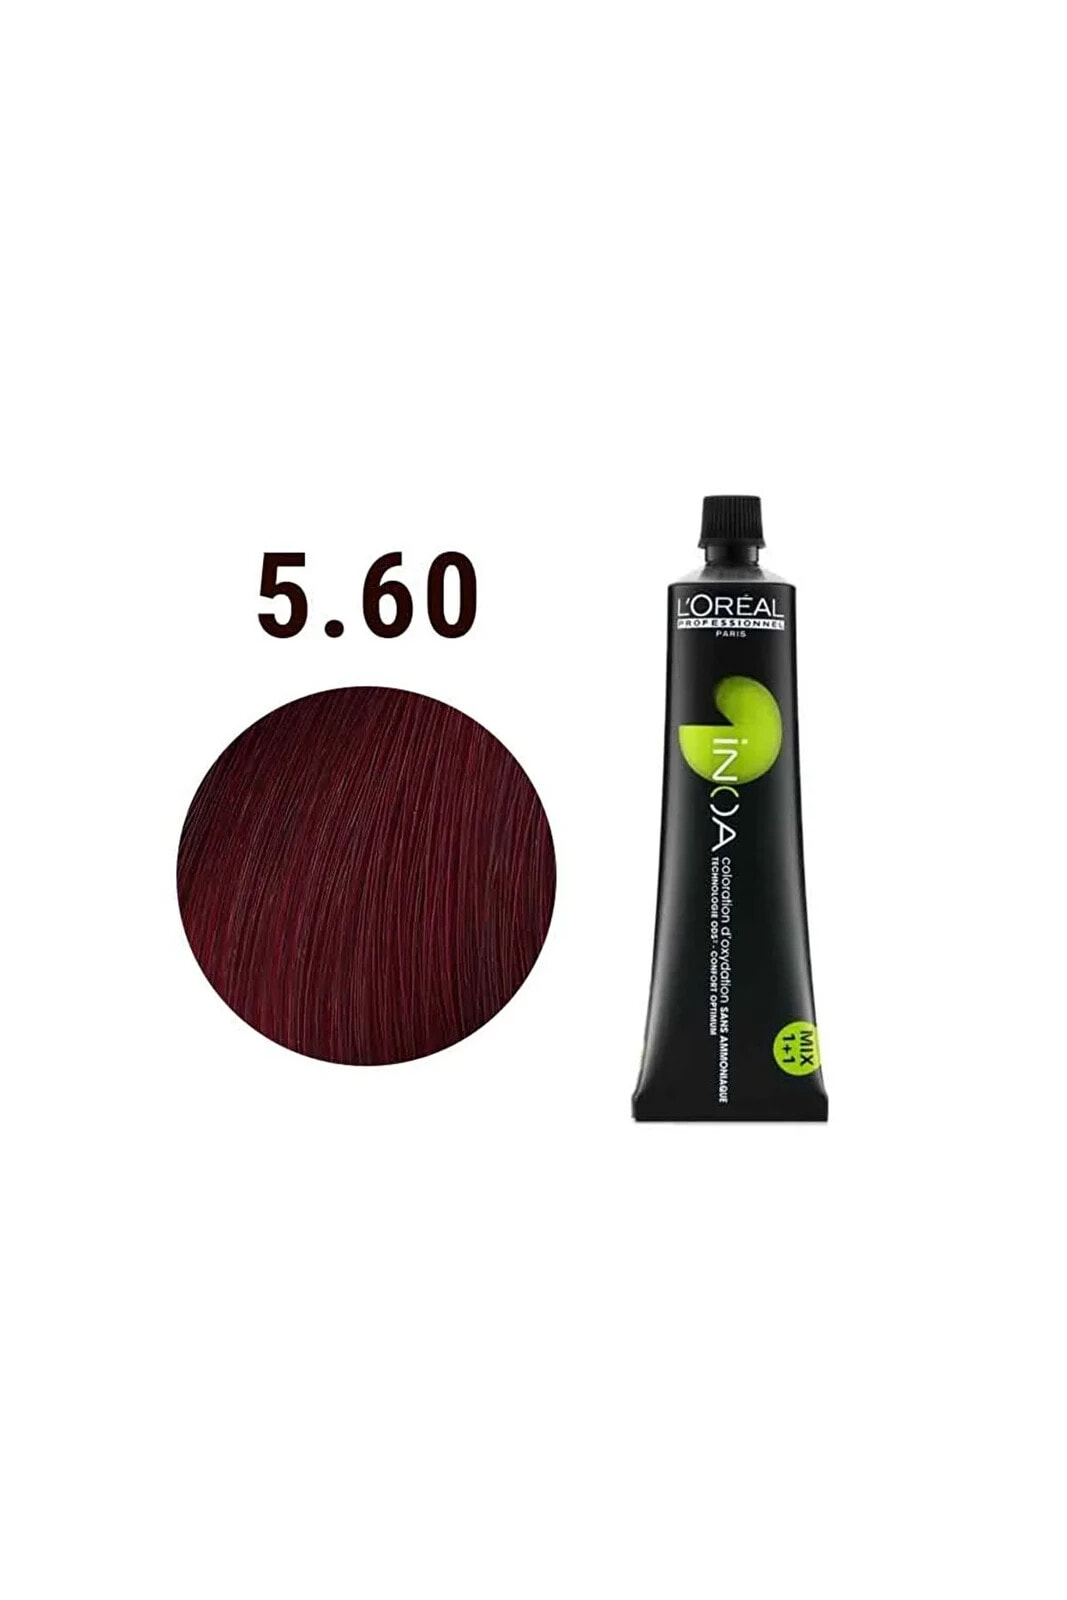 Inoa 5,60 Natural Light Brown Intense Red Defined Ammonia Free Permament Hair Color Cream 60ml